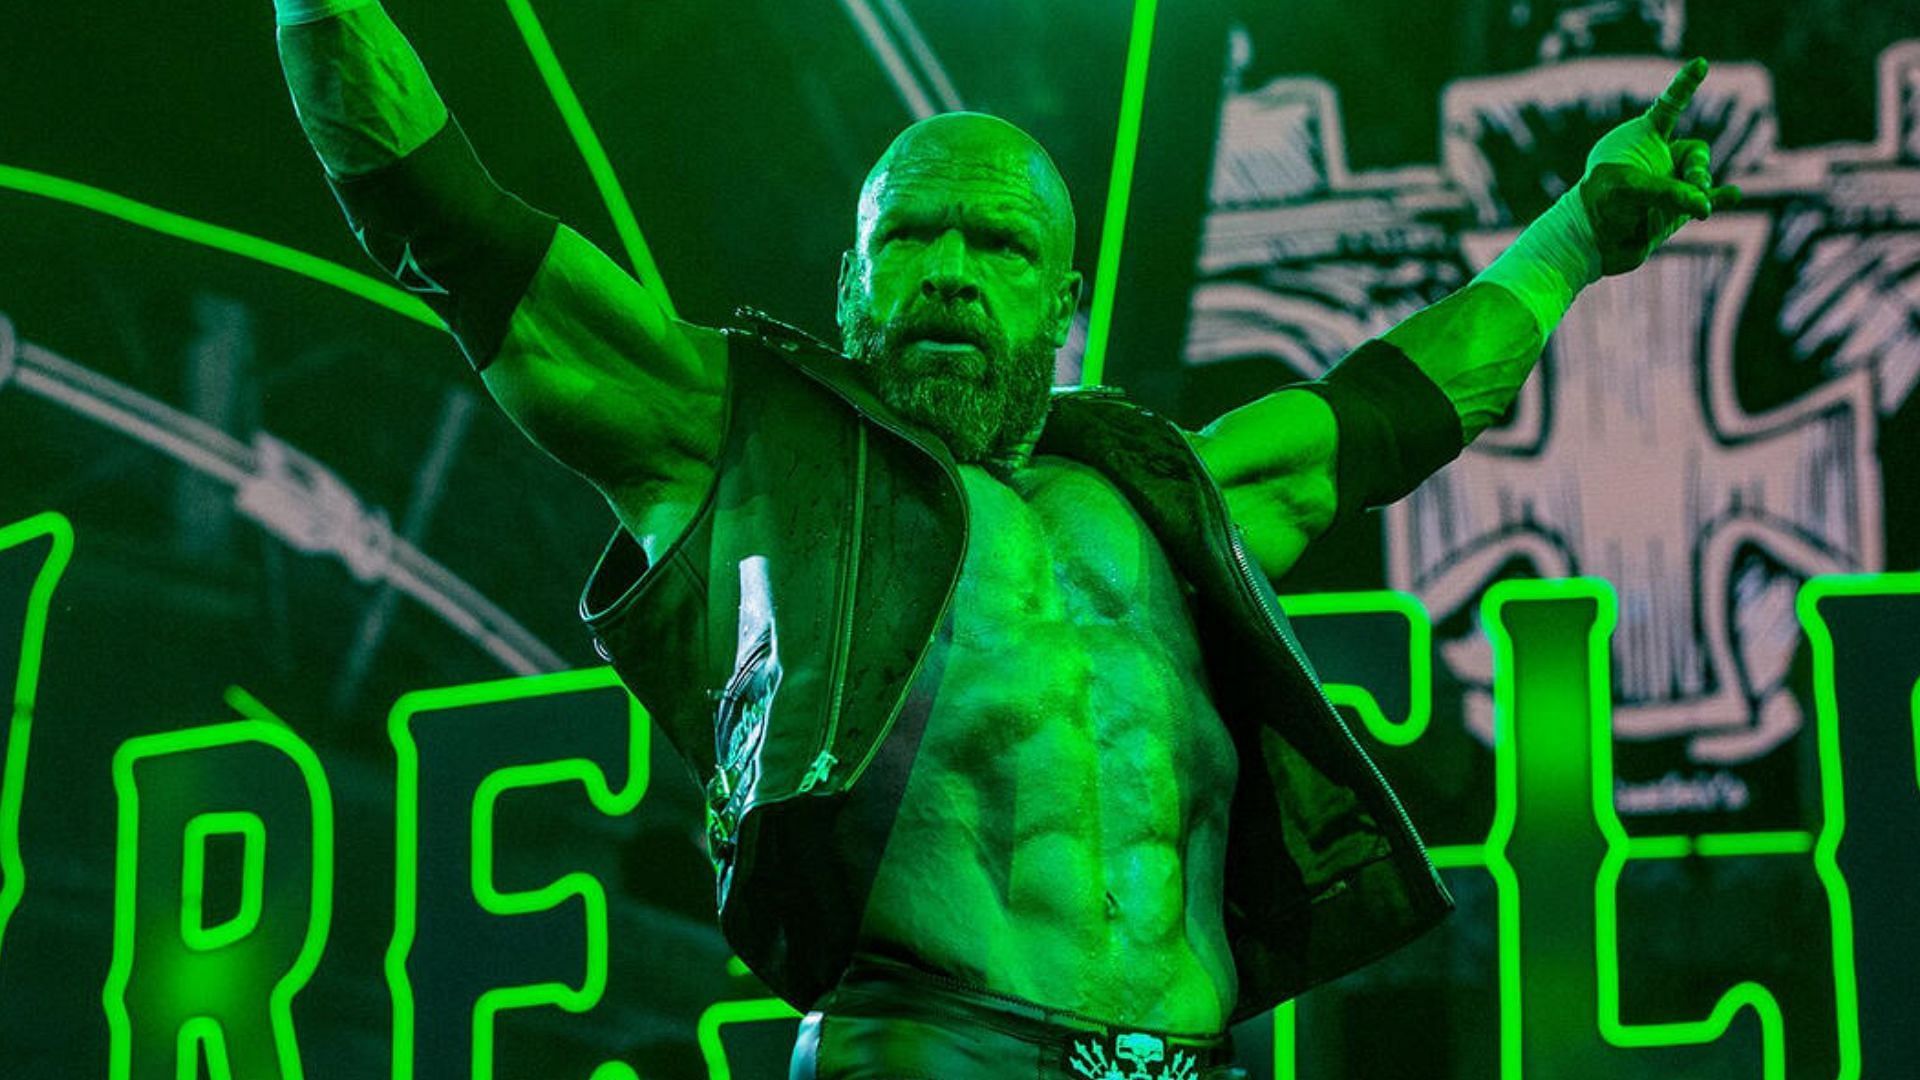 Former in-ring performer and current CCO of WWE, Triple H [Image credit: WWE]